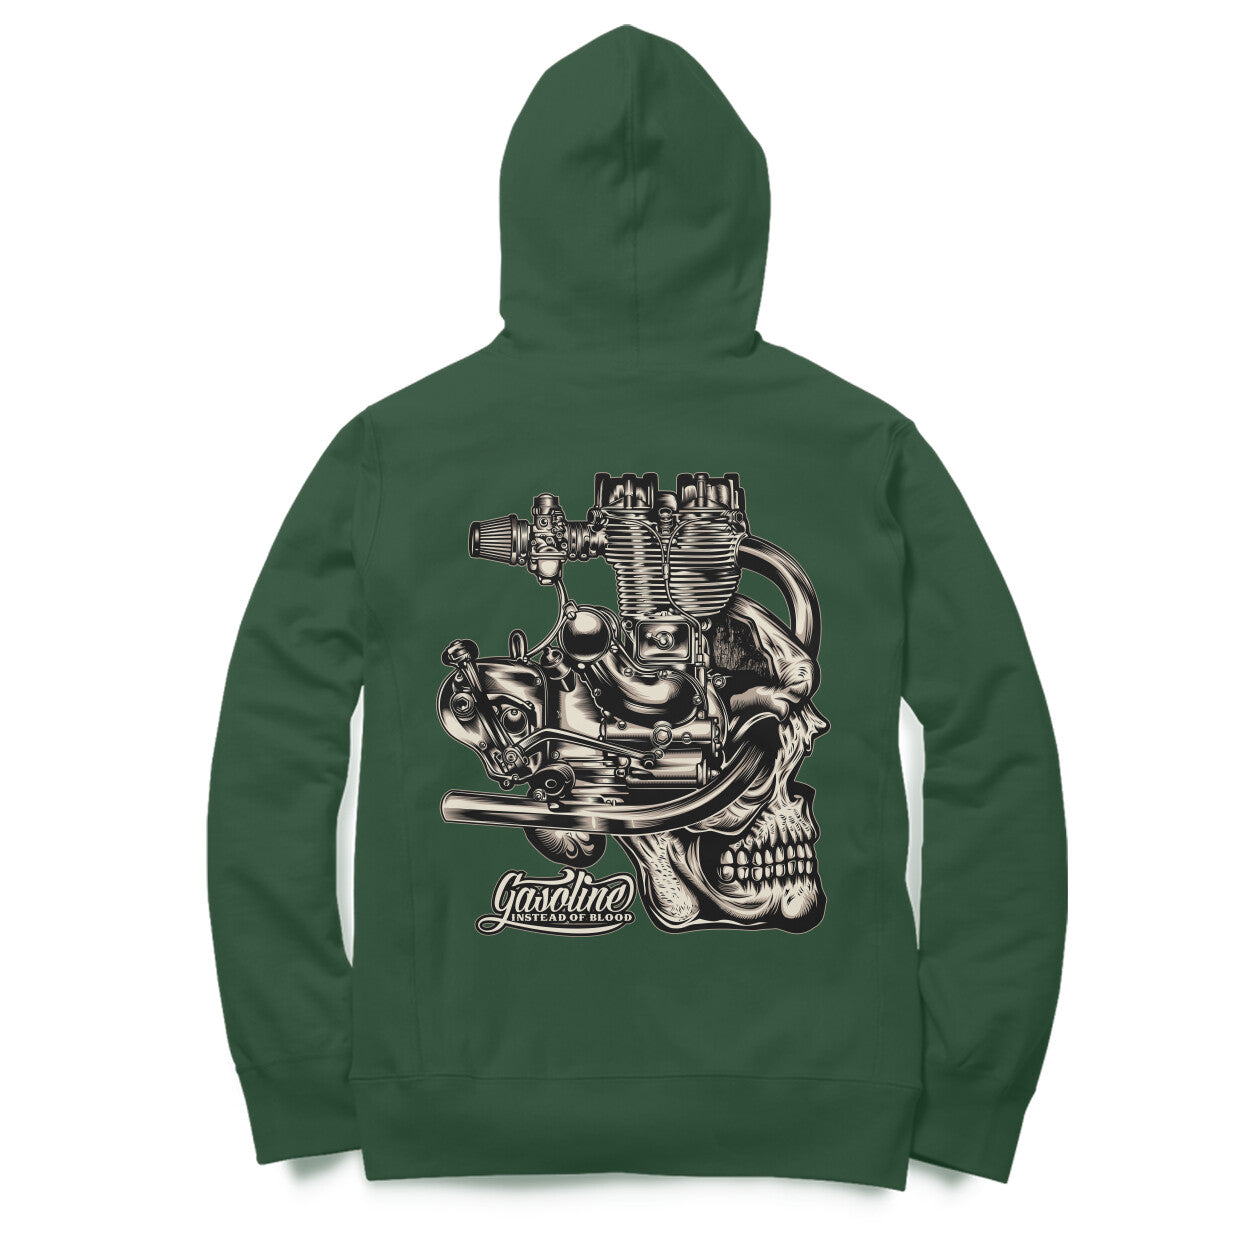 Old Enfield Engine Graphic Skull Gasoline instead of blood - Hoodie